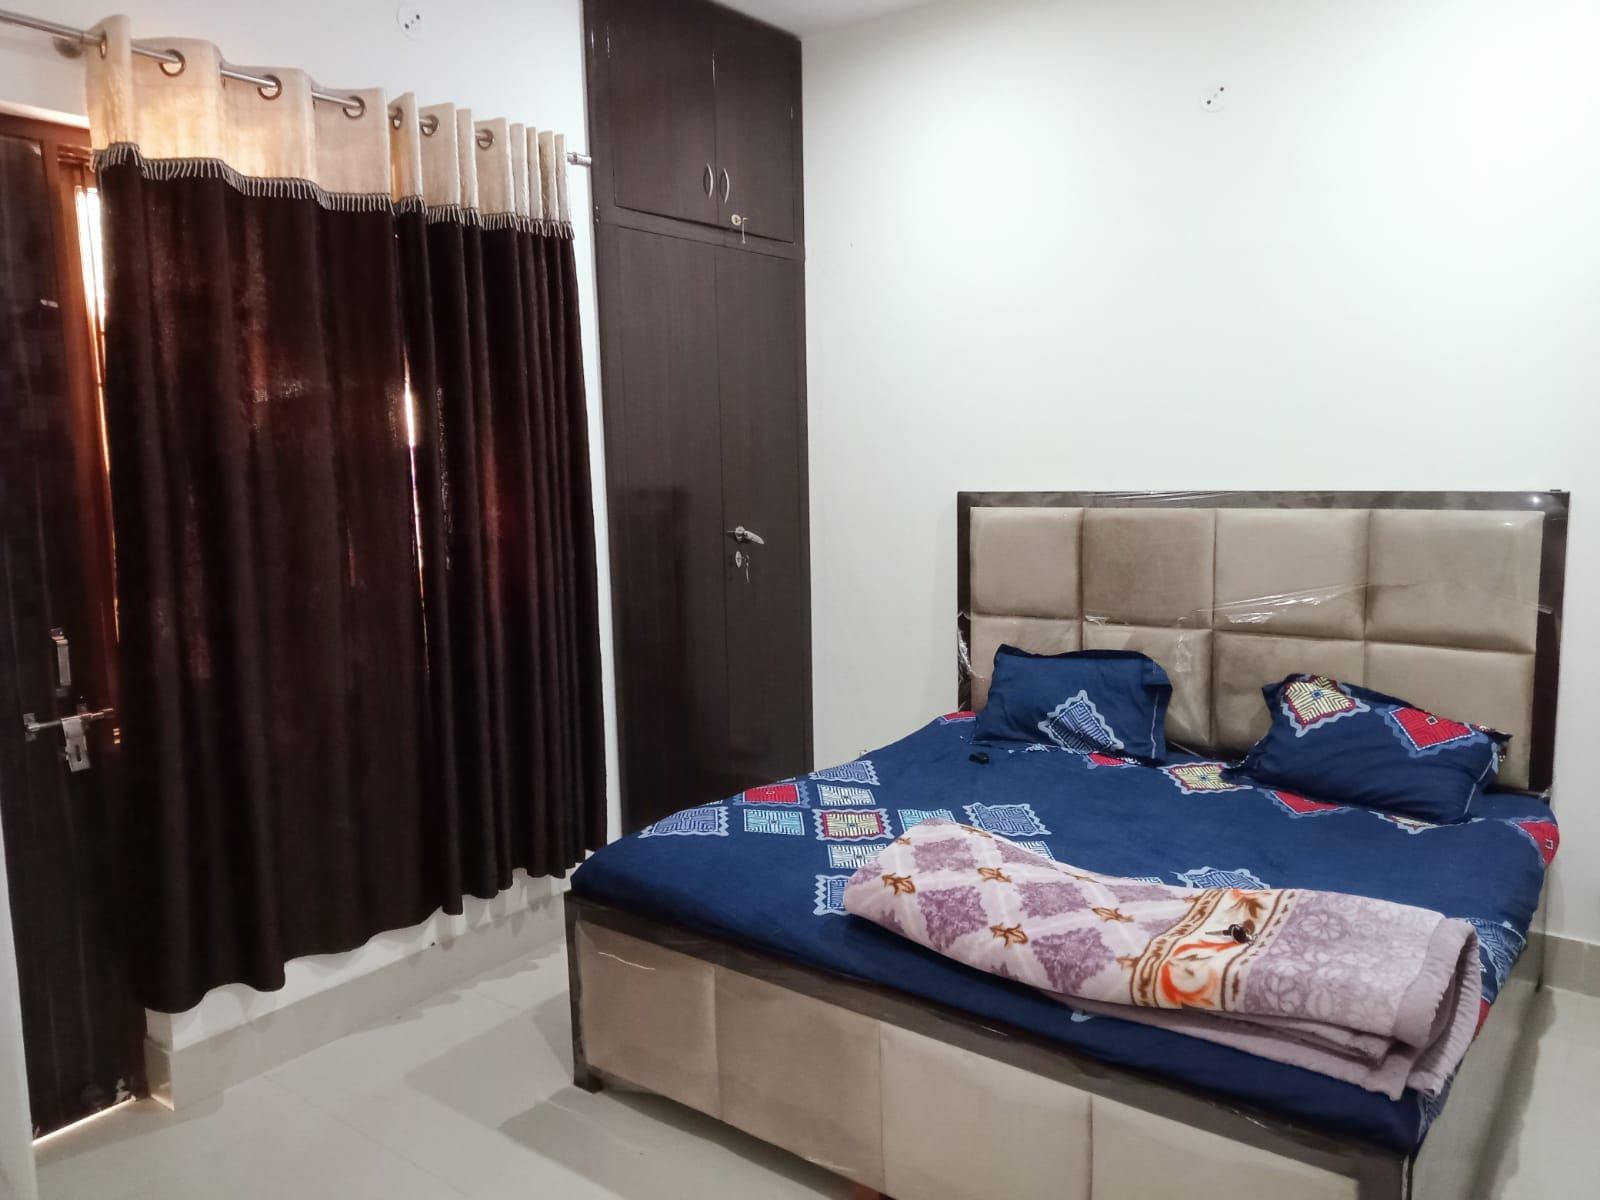 2 Bed/ 2 Bath Rent House/ Bungalow/ Villa, Furnished for rent @ST-10 Sector - 130 Noida